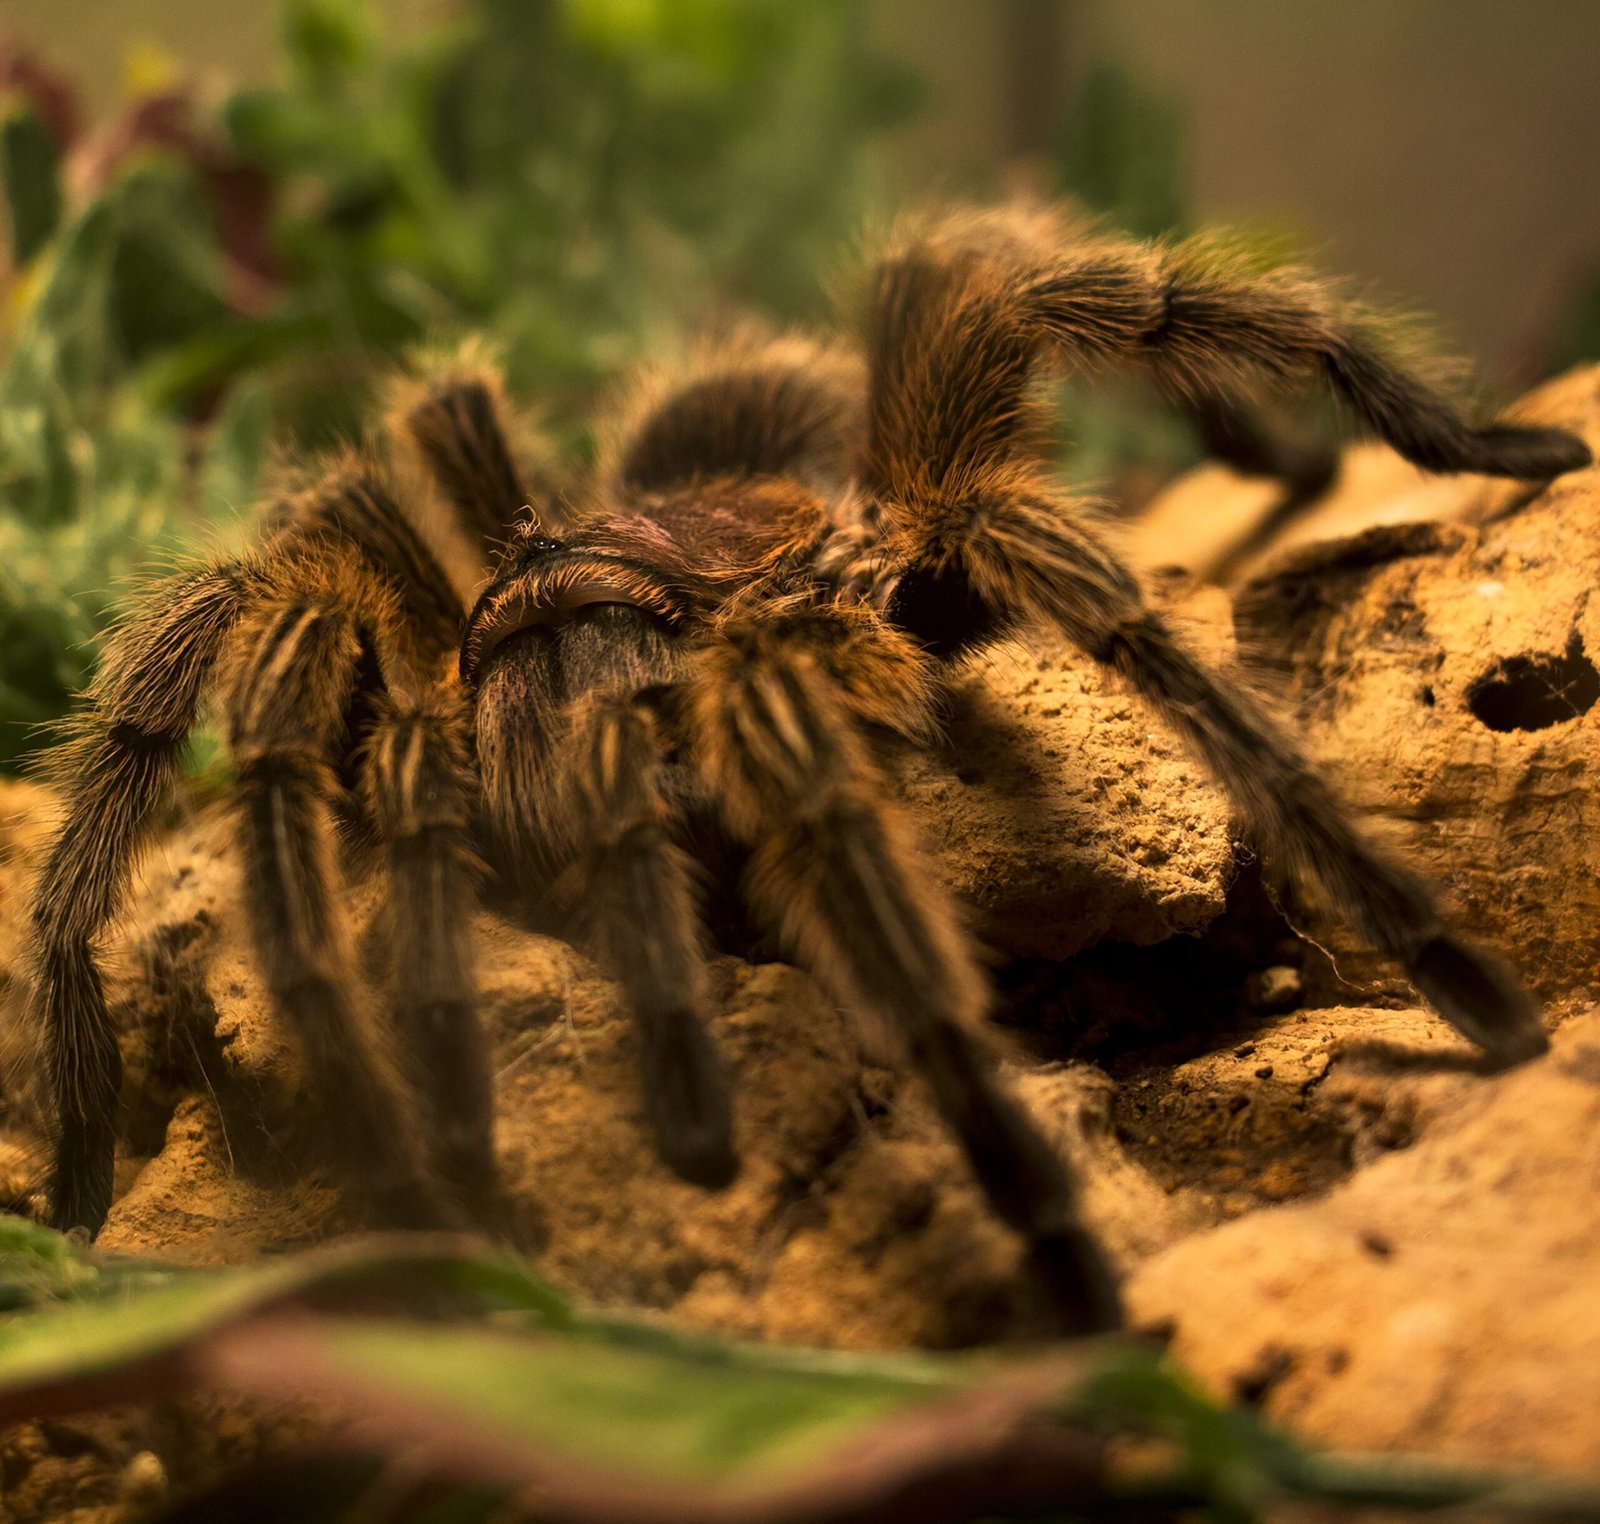 Are There Specific Mammals That Dig Into Burrows To Prey On Tarantulas?